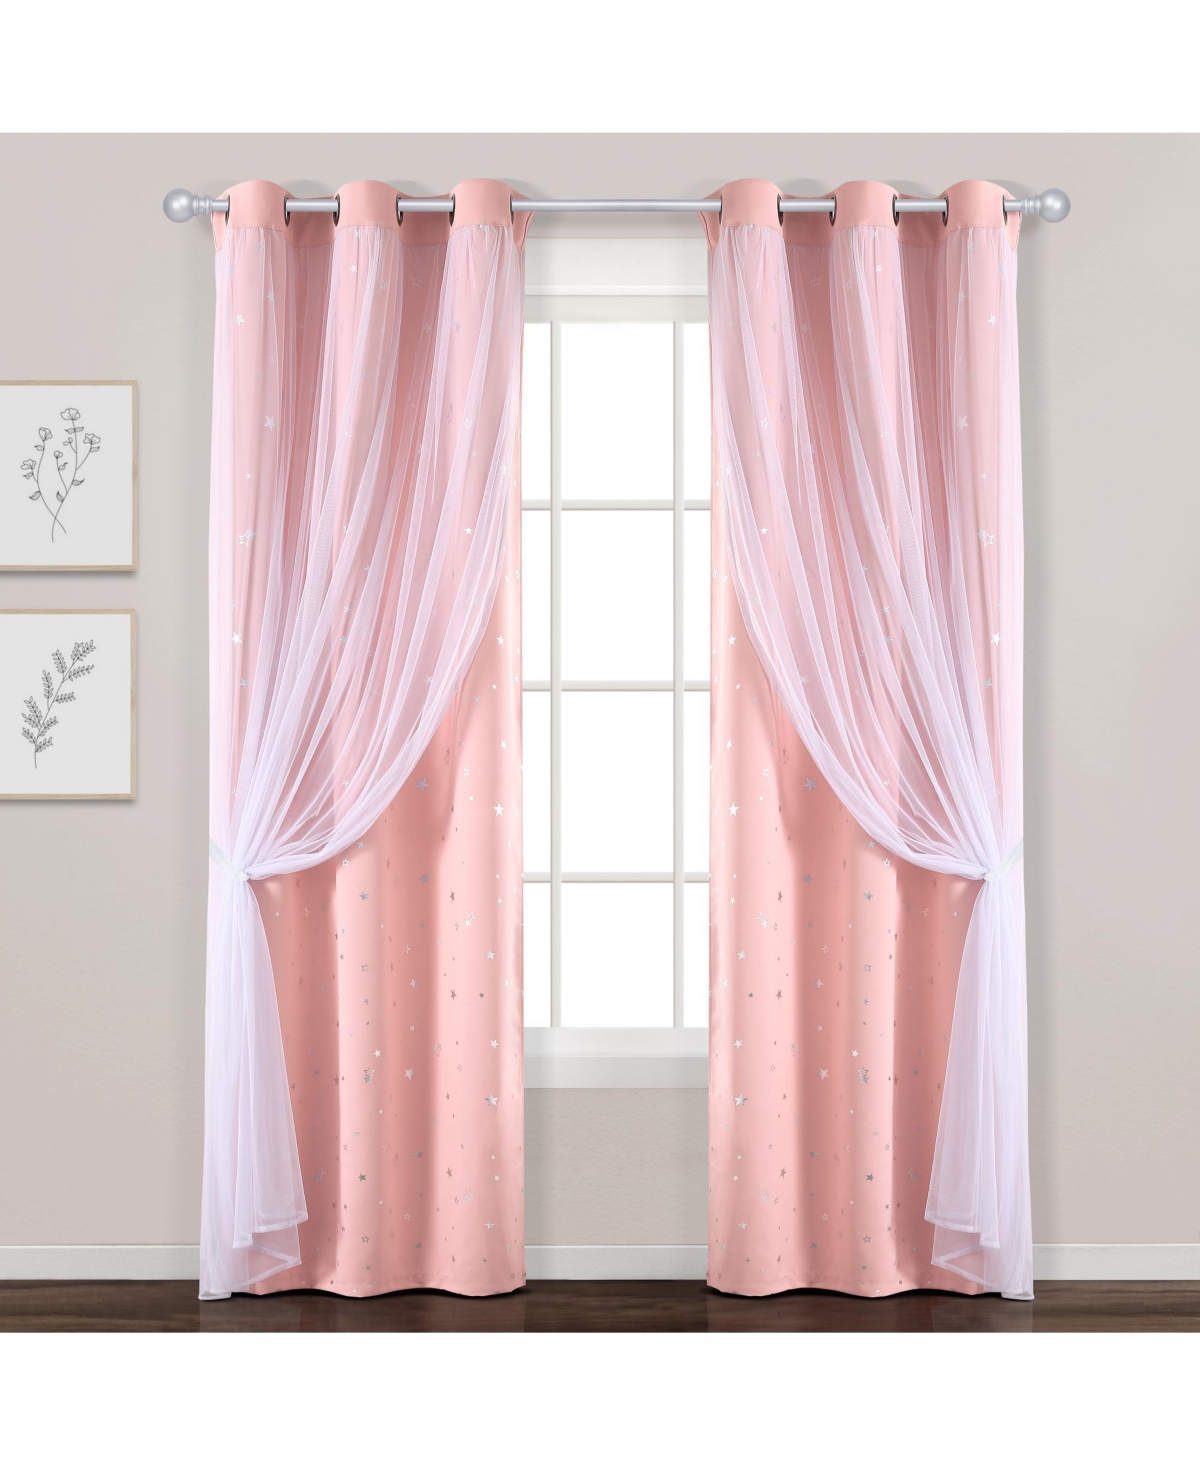 Lush Decor Star Sheer Insulated Grommet Blackout Window Curtain Panels In Pink